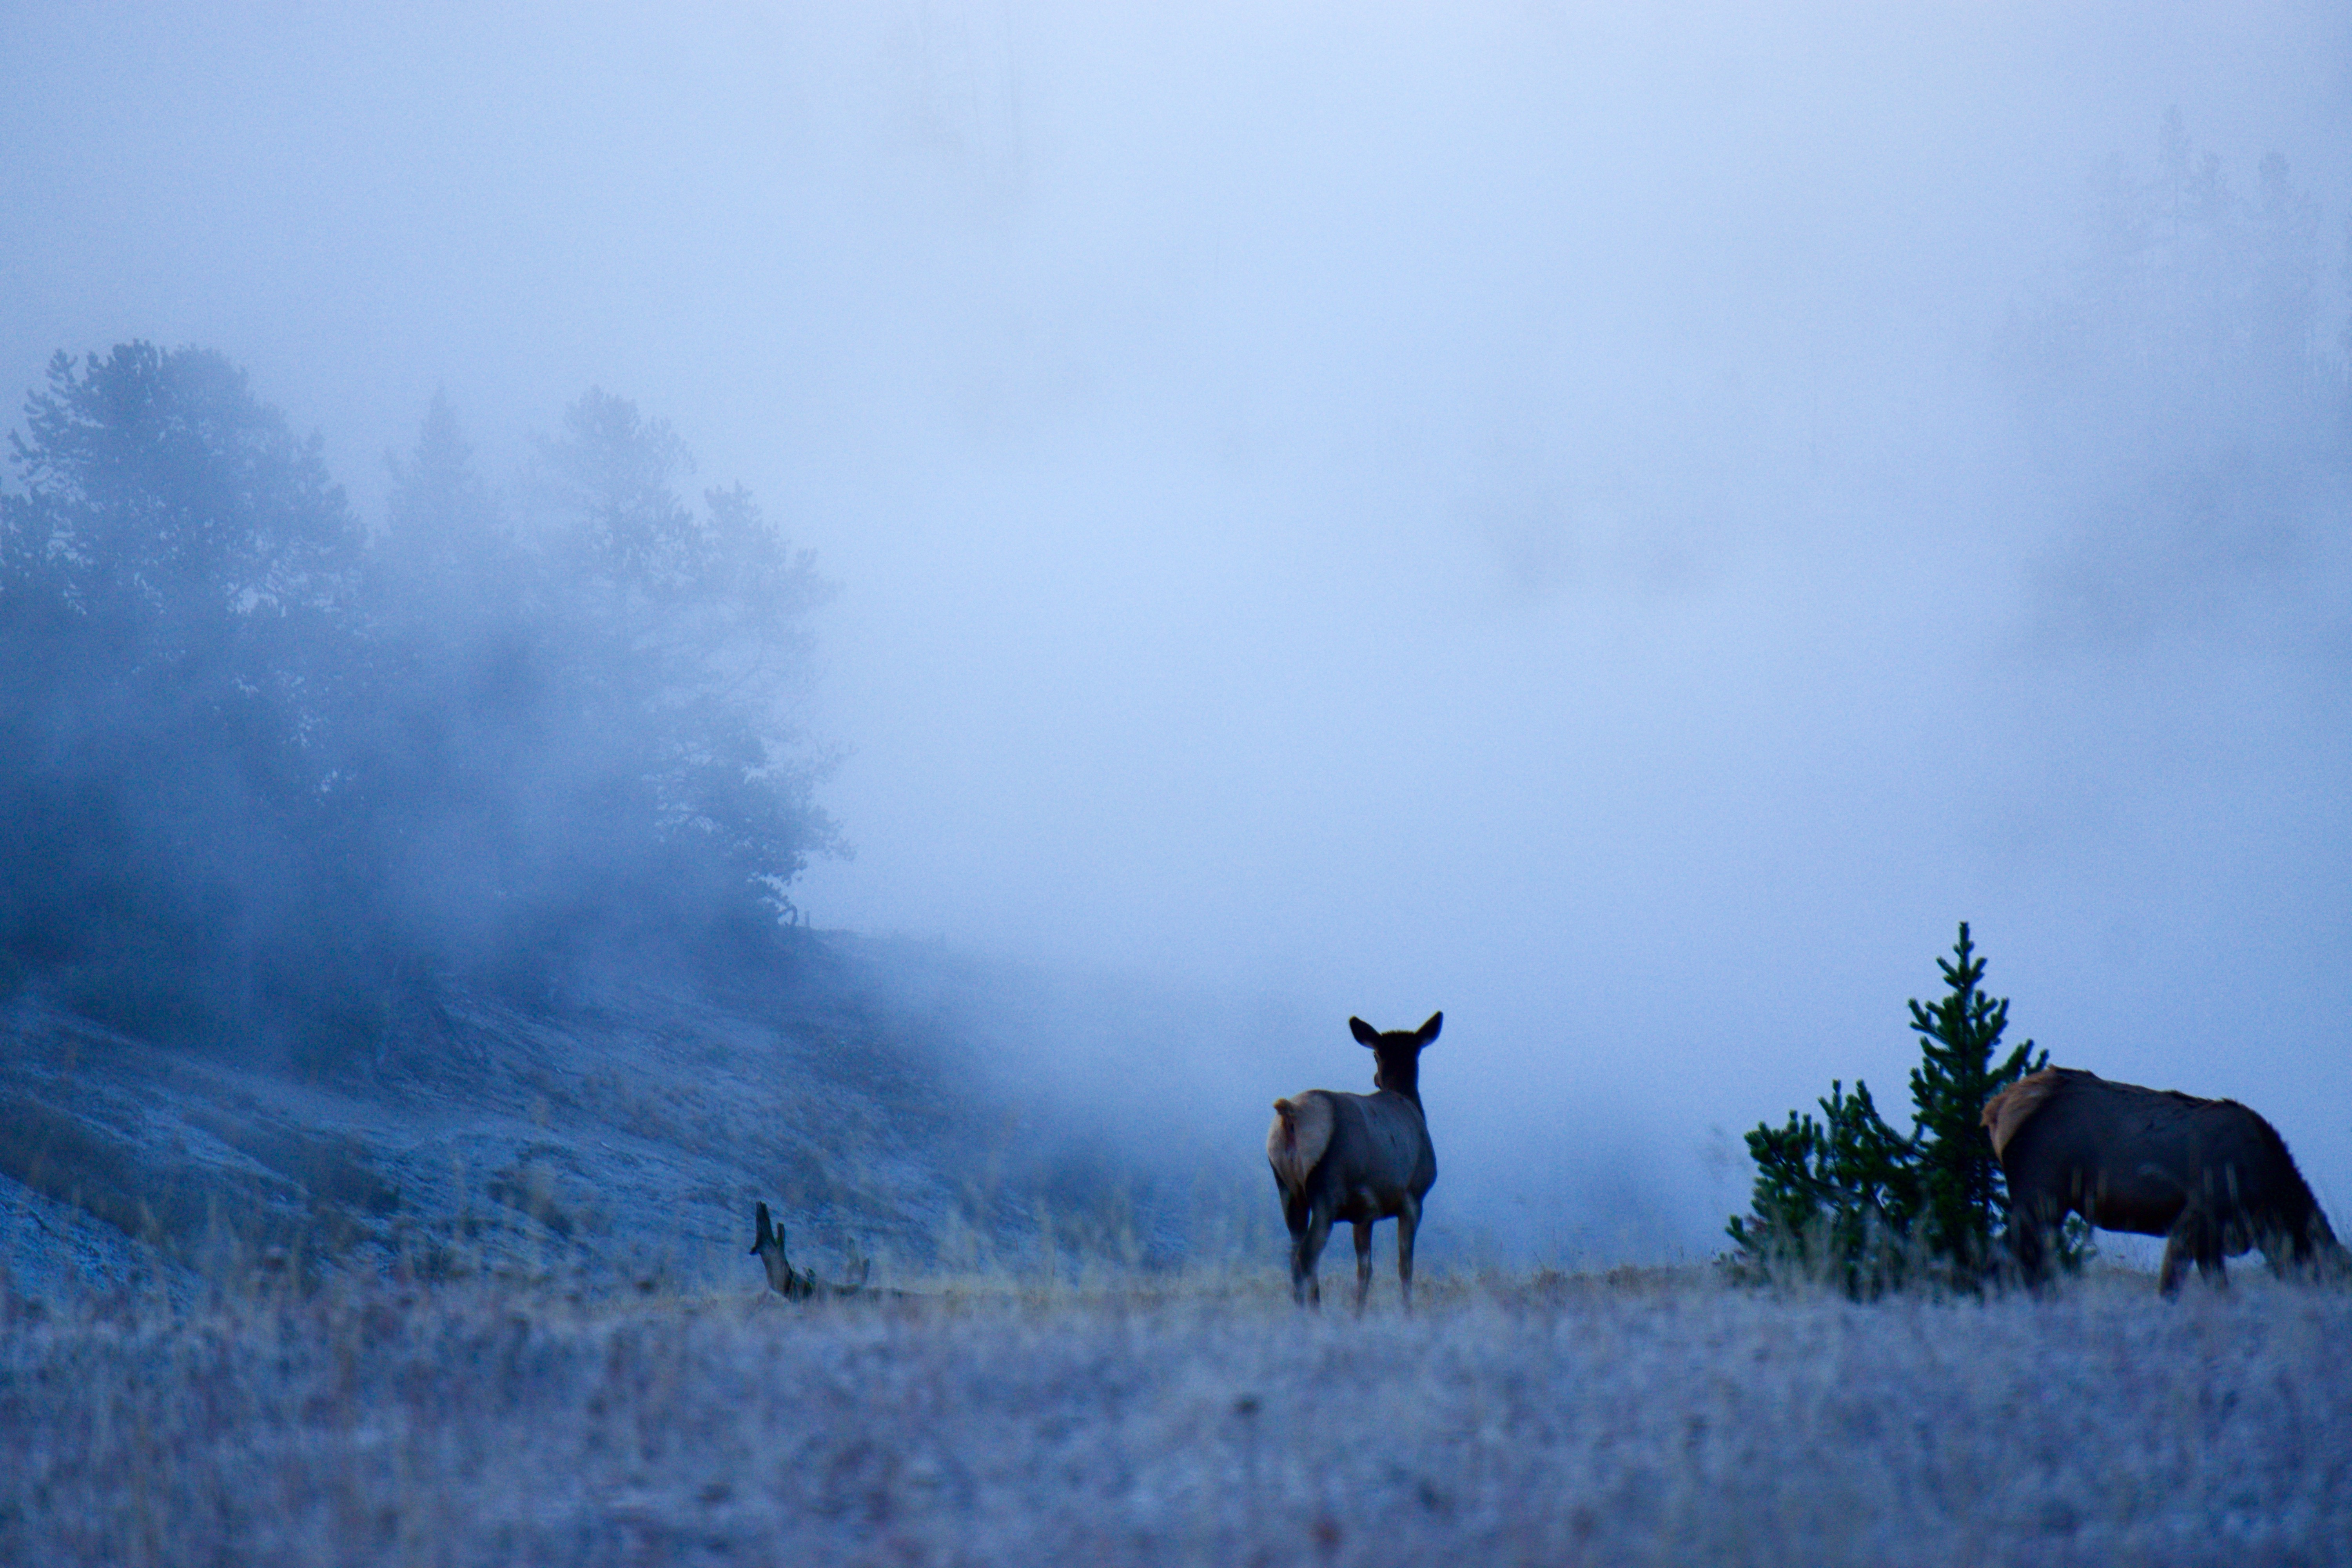 A small herd of elk grazing in the early morning mist, in Yellowstone National Park, October 2017